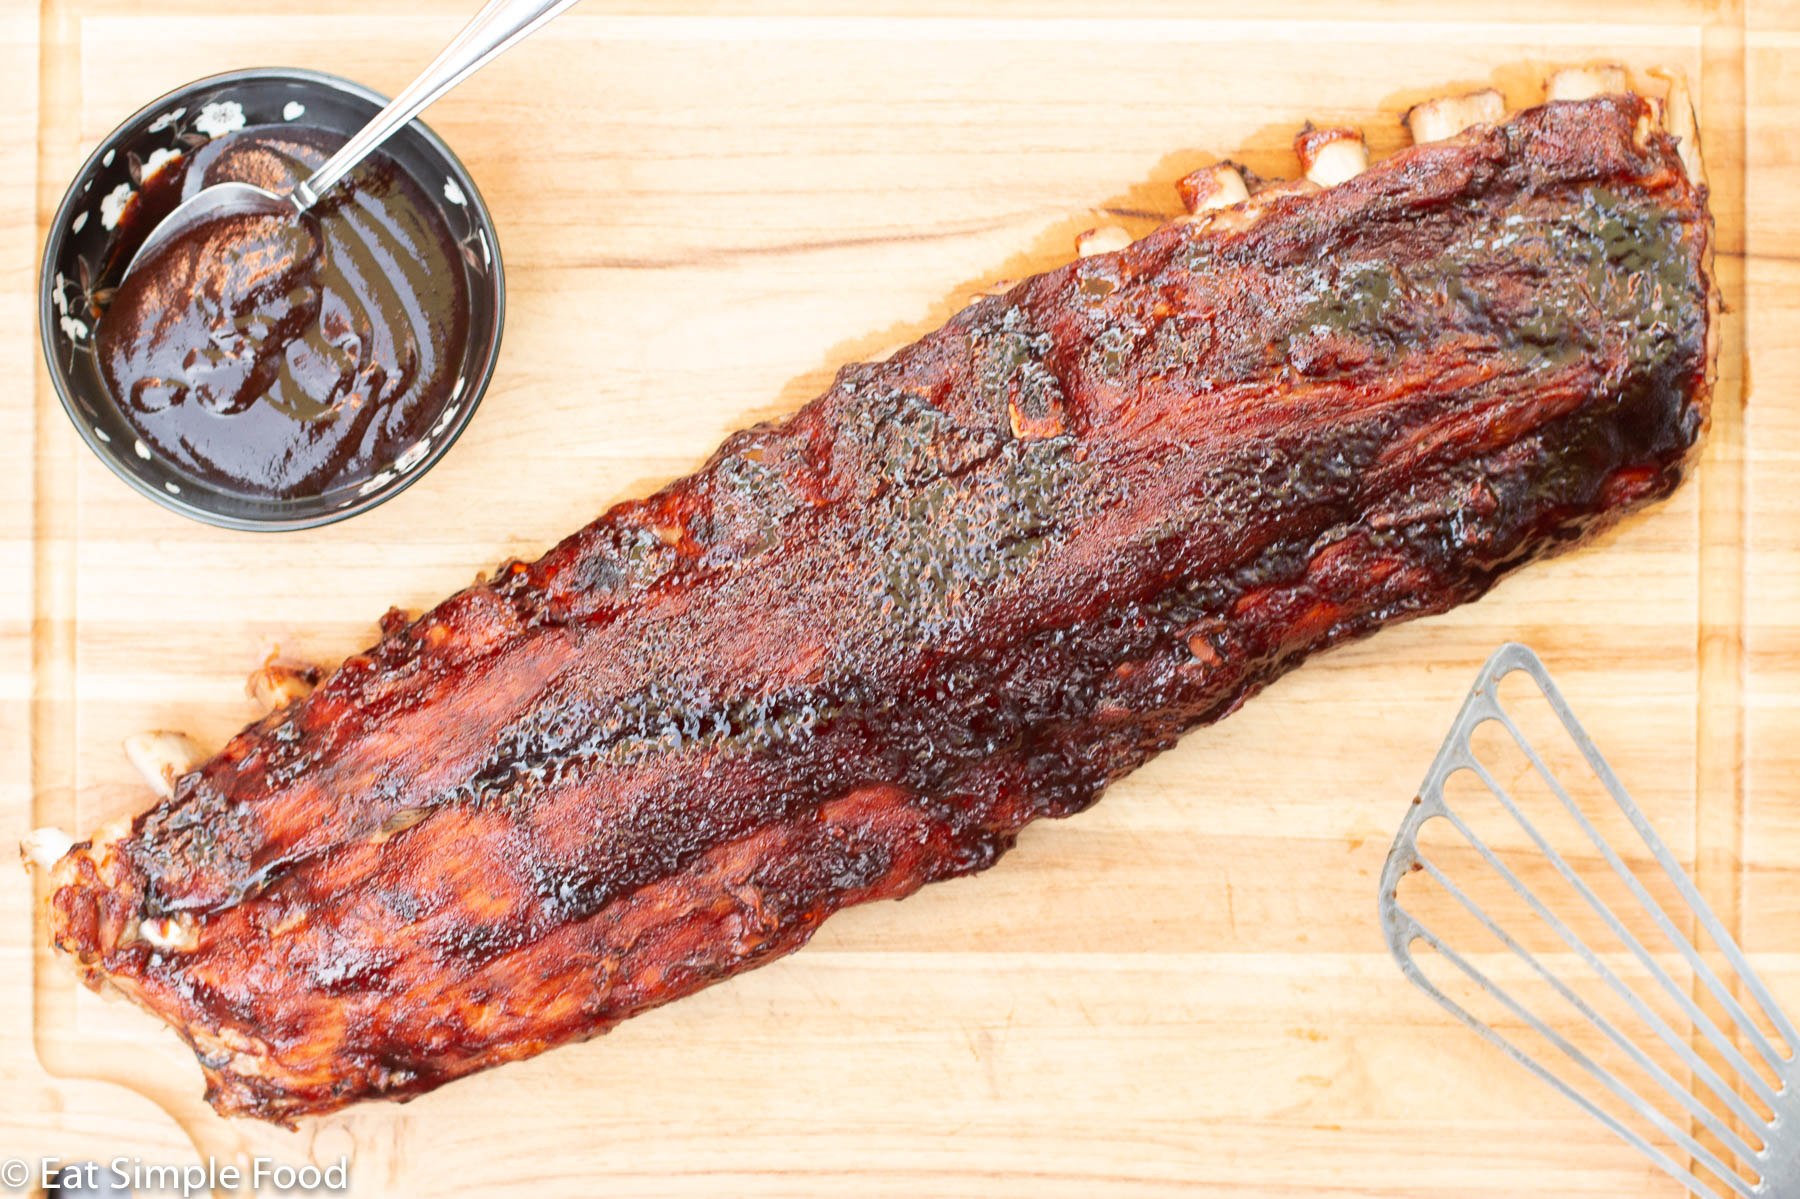 Whole Cooked Baby Back Ribs With BBQ Sauce Broiled On with a Metal Spatula and small black bowl of bbq sauce on a wood cutting board. Top view.